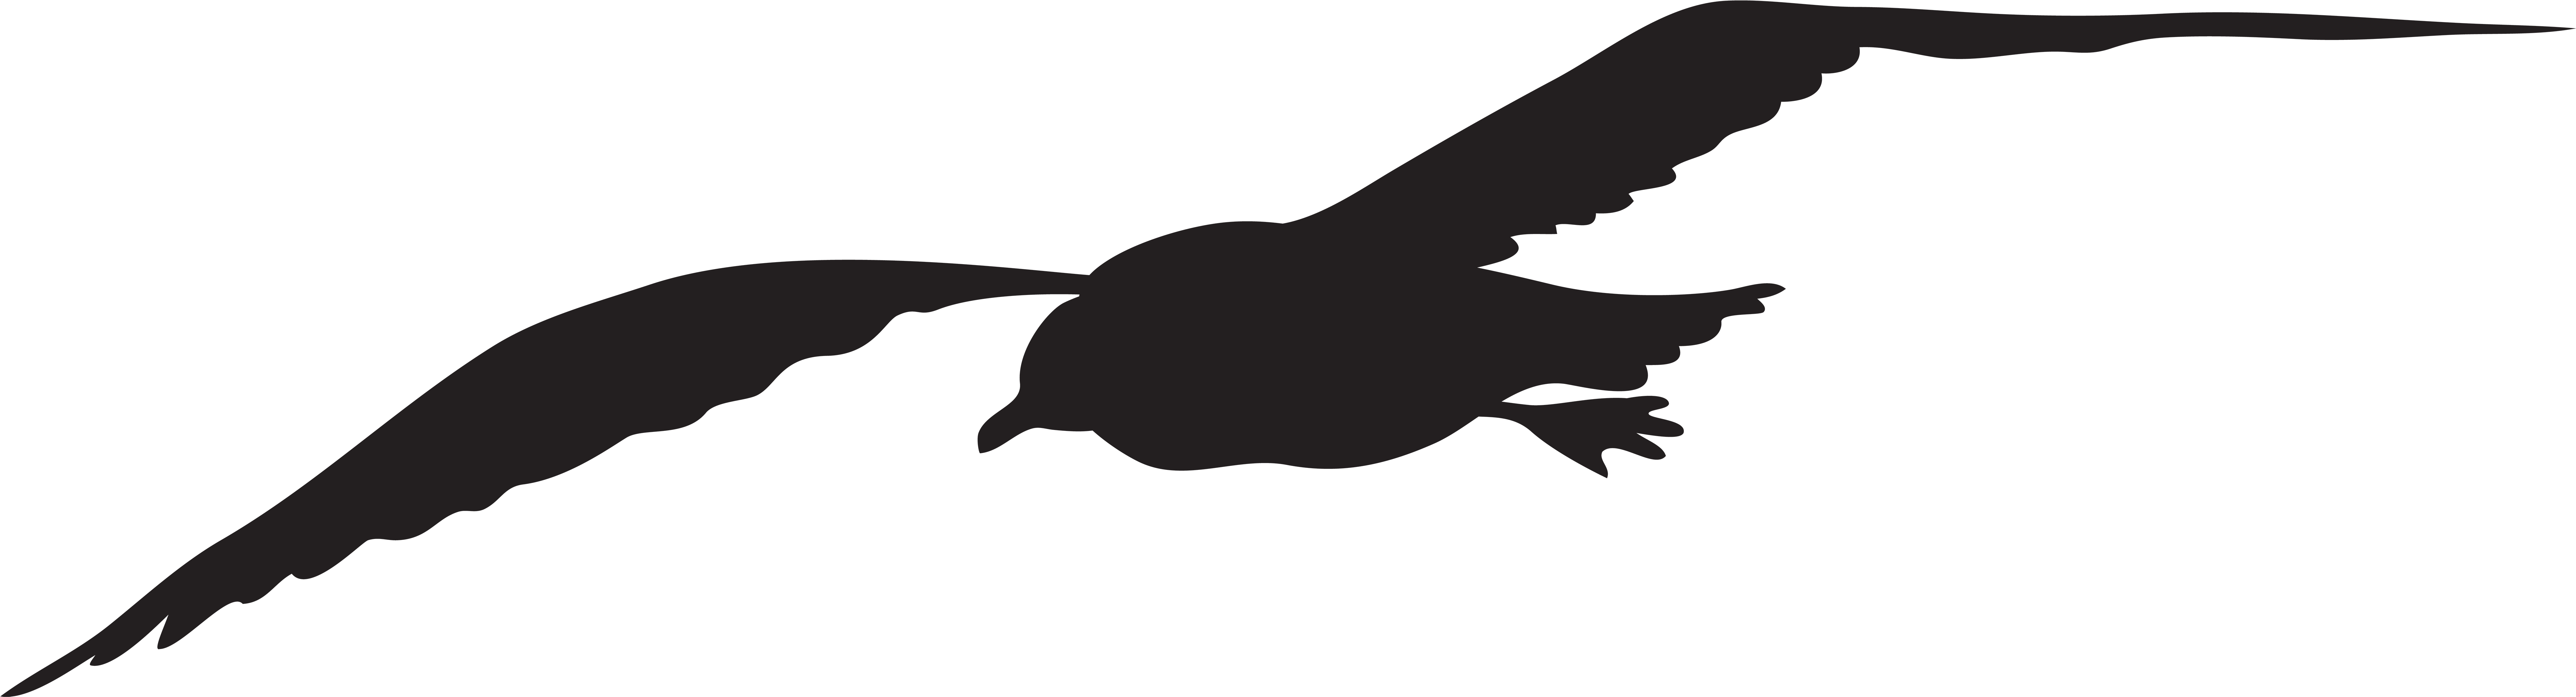 Soaring Bird Silhouette PNG